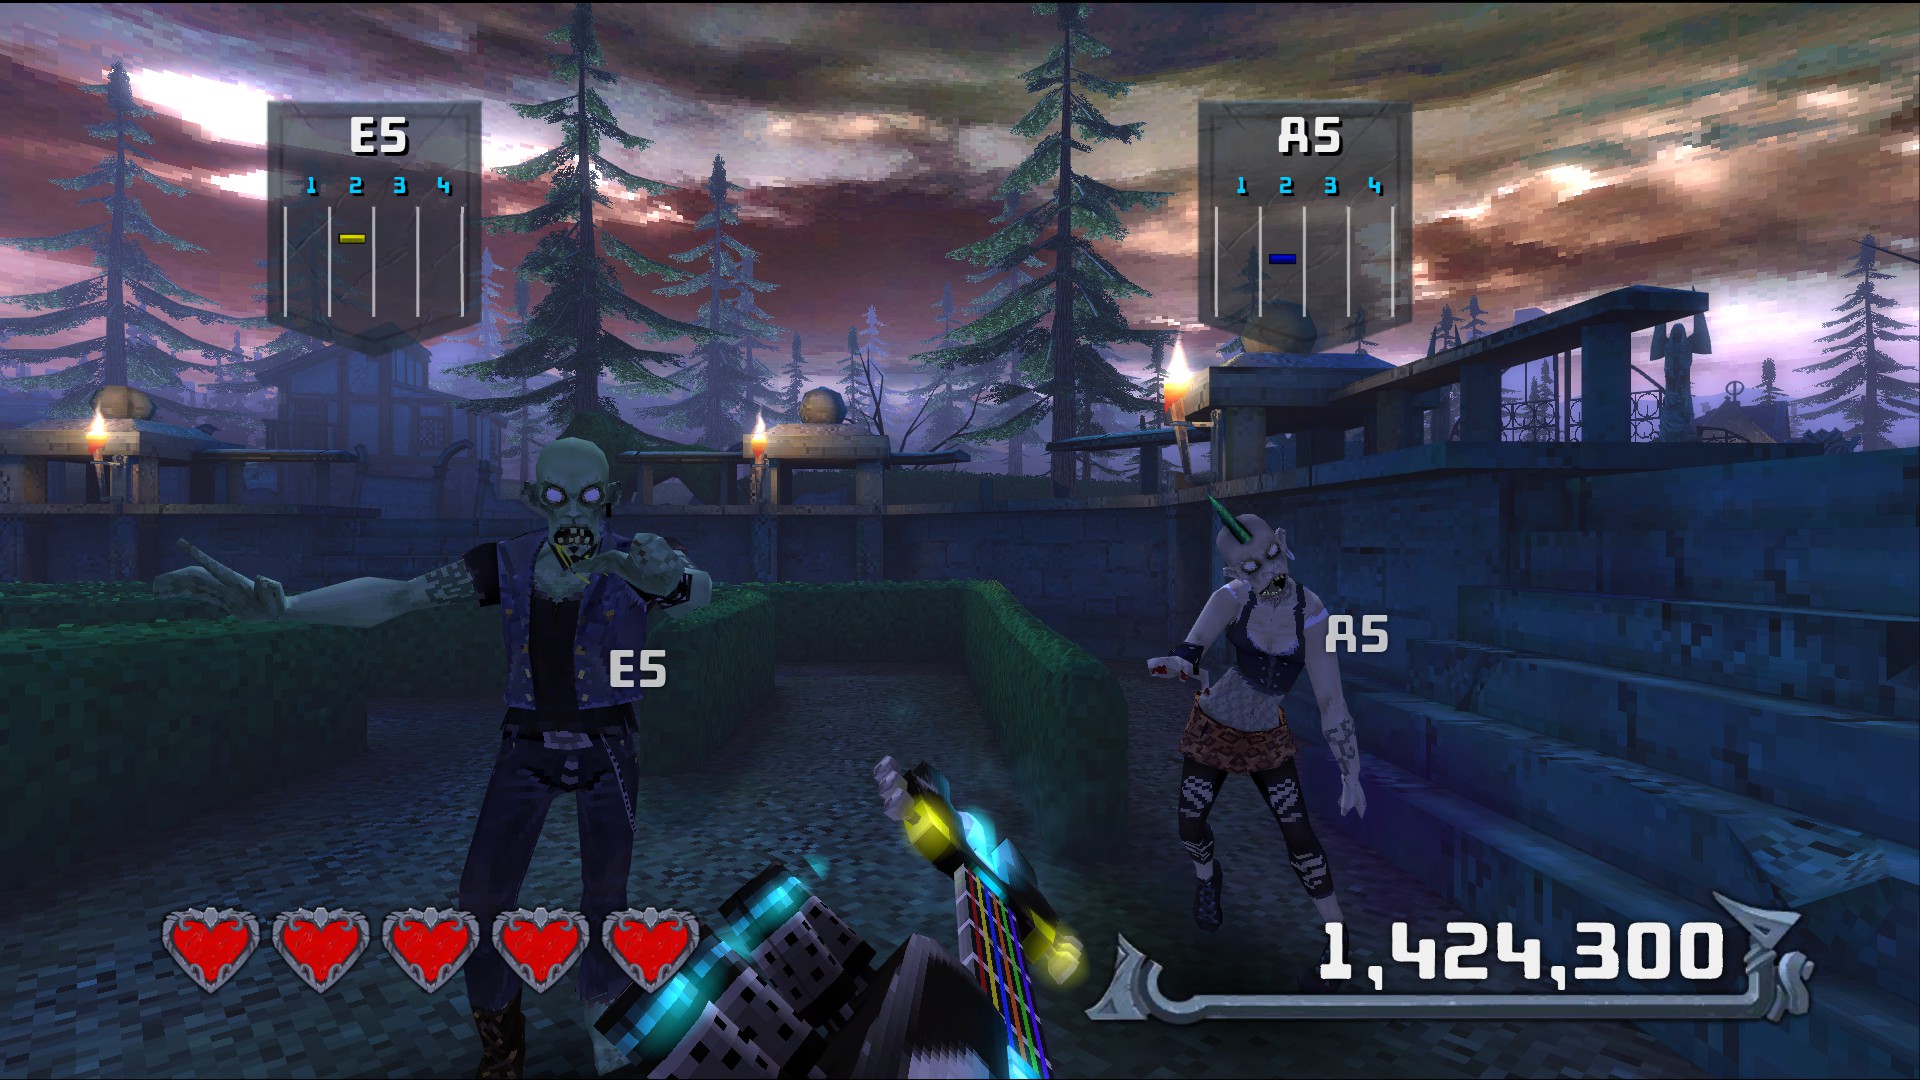 An in-game screenshot from Rocksmith's Chordead minigame. Two zombies approach the player, a chord displayed above each.